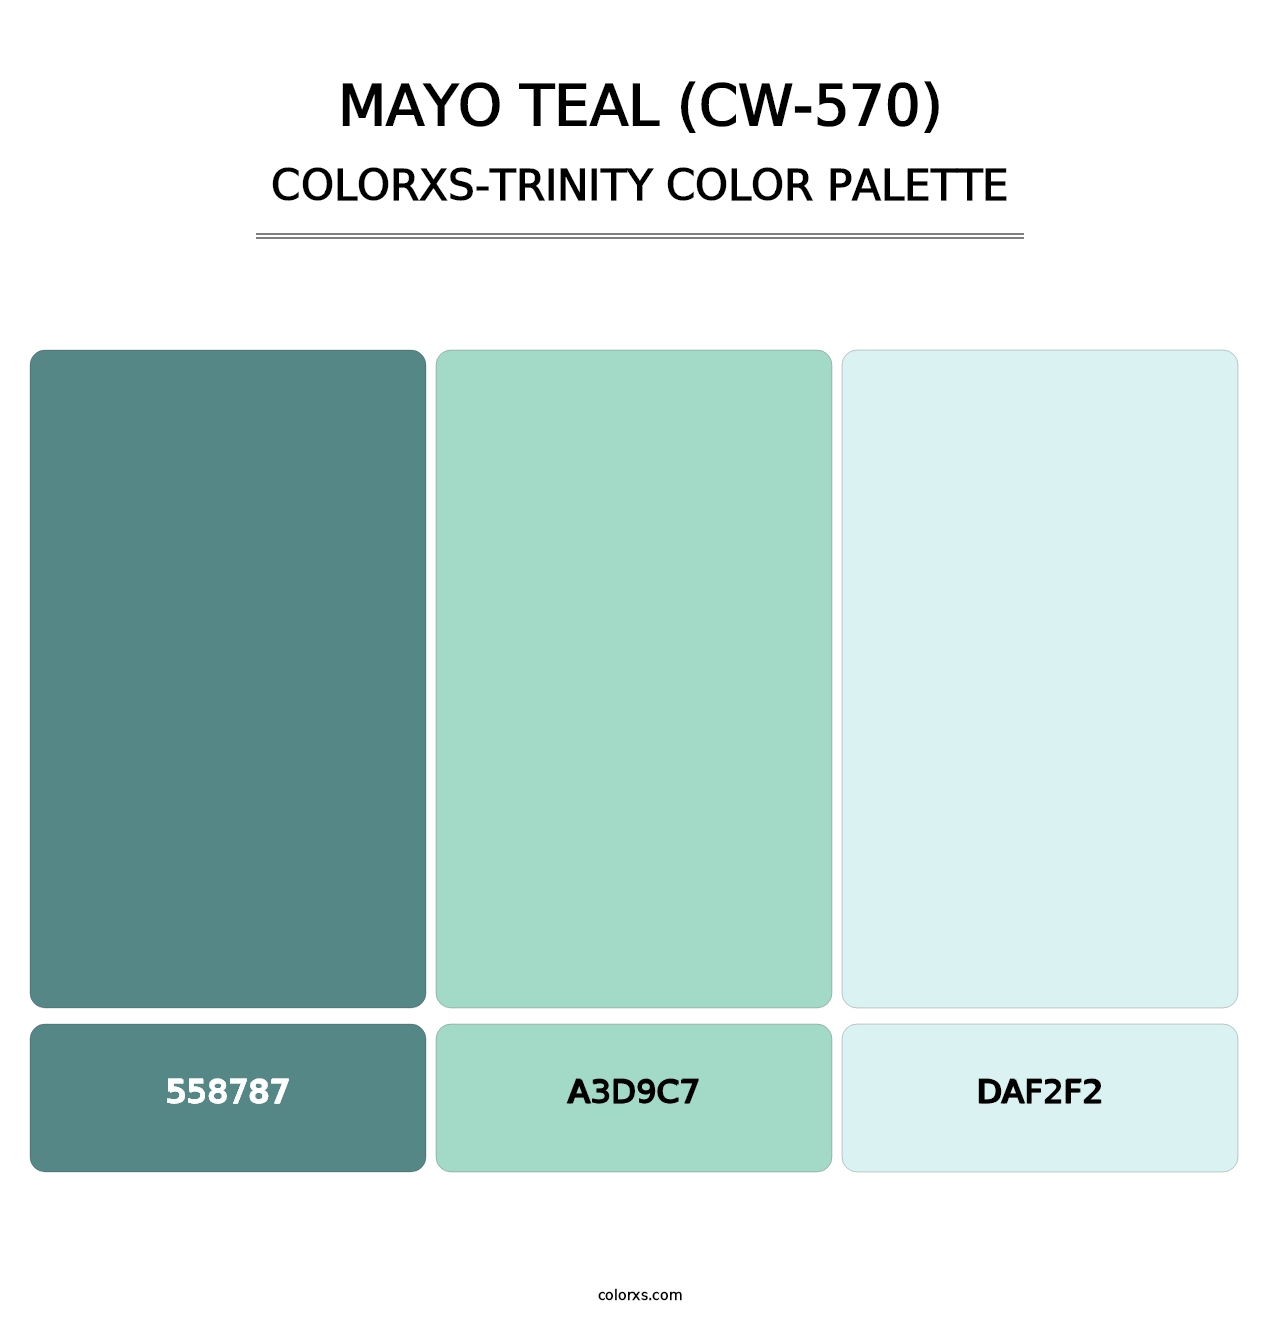 Mayo Teal (CW-570) - Colorxs Trinity Palette